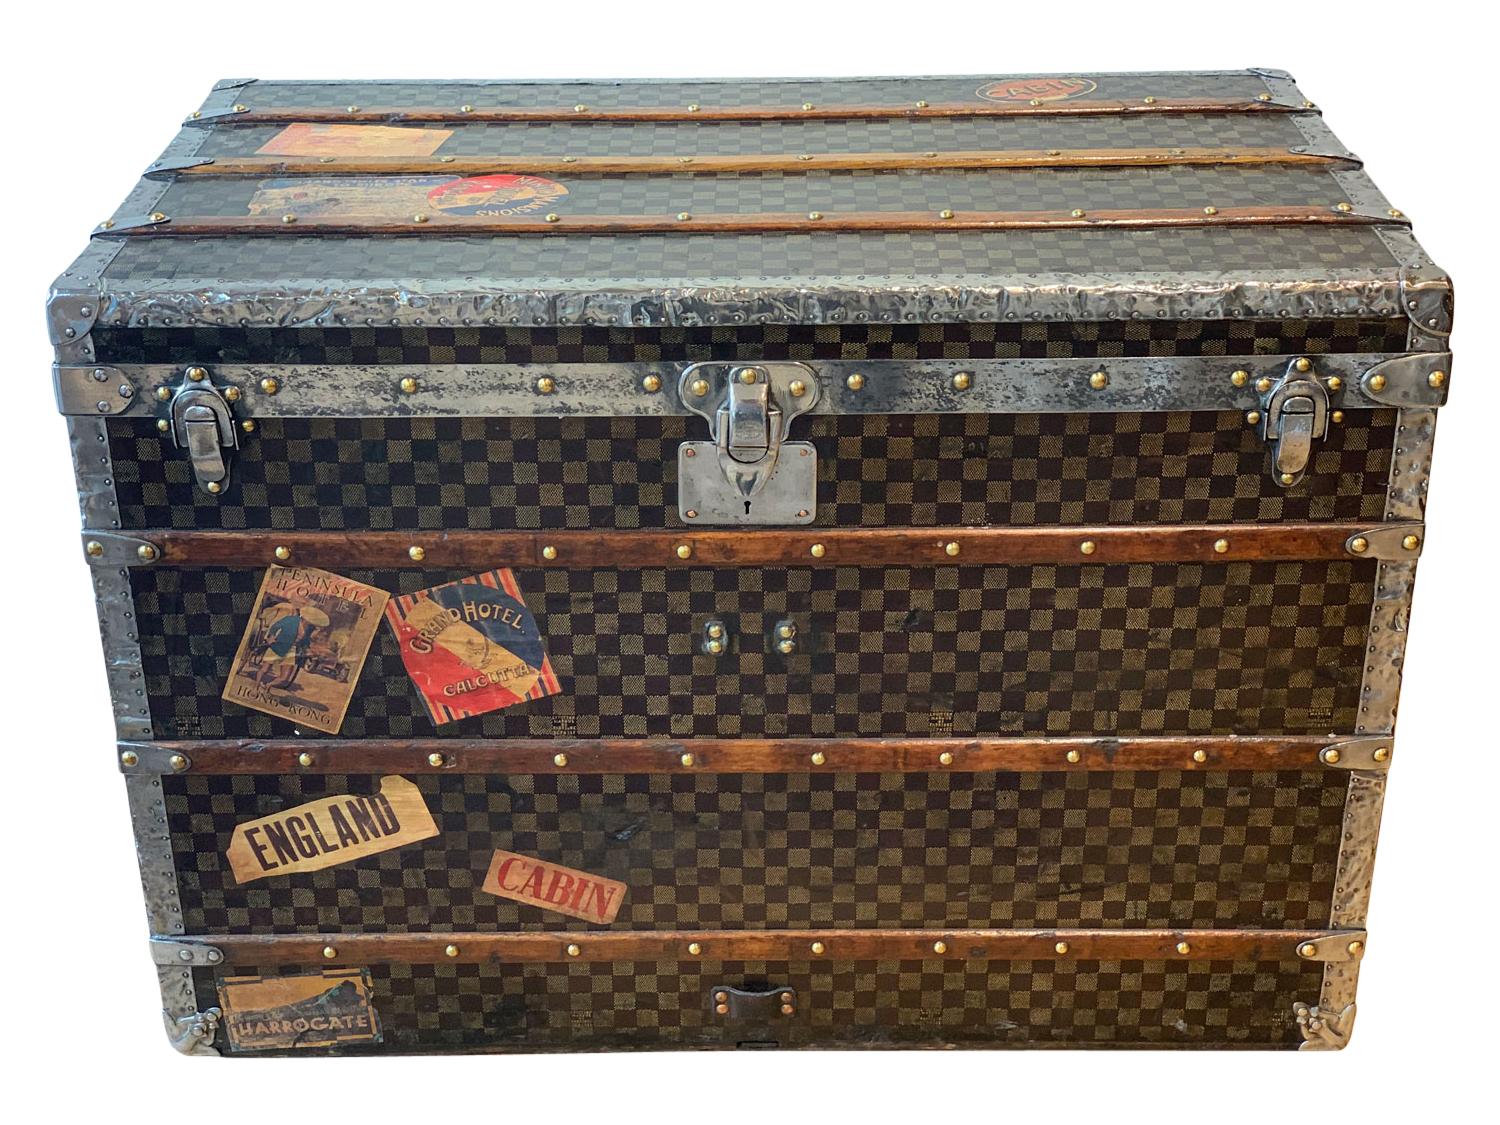 A Louis Vuitton Damier steamer trunk, circa 1905. The checkerboard pattern with steel bound hardware and steel handles, covered in original travel stickers. The design of Louis Vuitton’s Damier was the result of the creative spark that shined